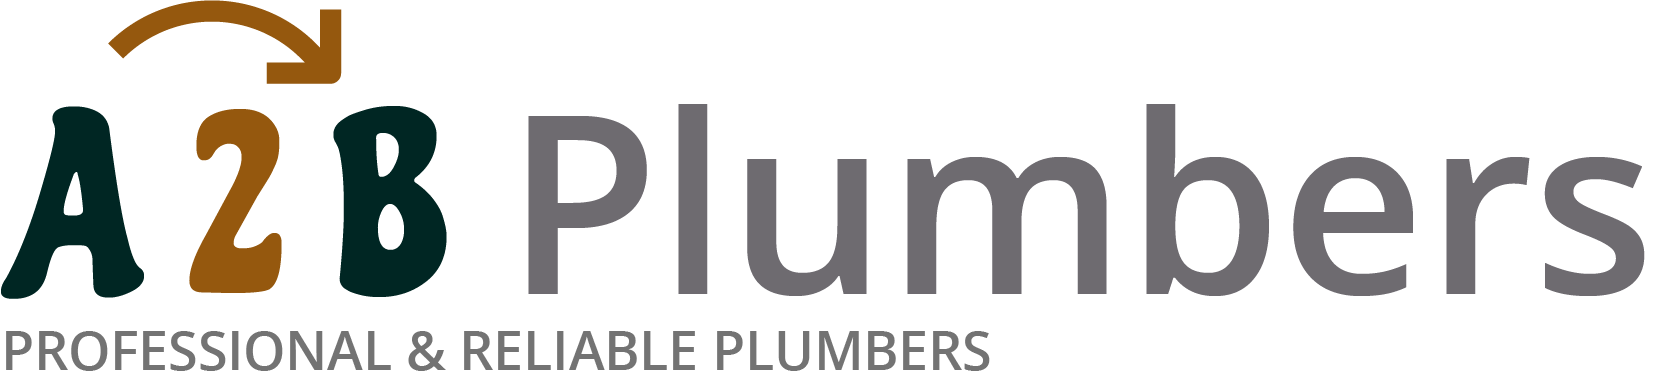 If you need a boiler installed, a radiator repaired or a leaking tap fixed, call us now - we provide services for properties in Thurrock and the local area.